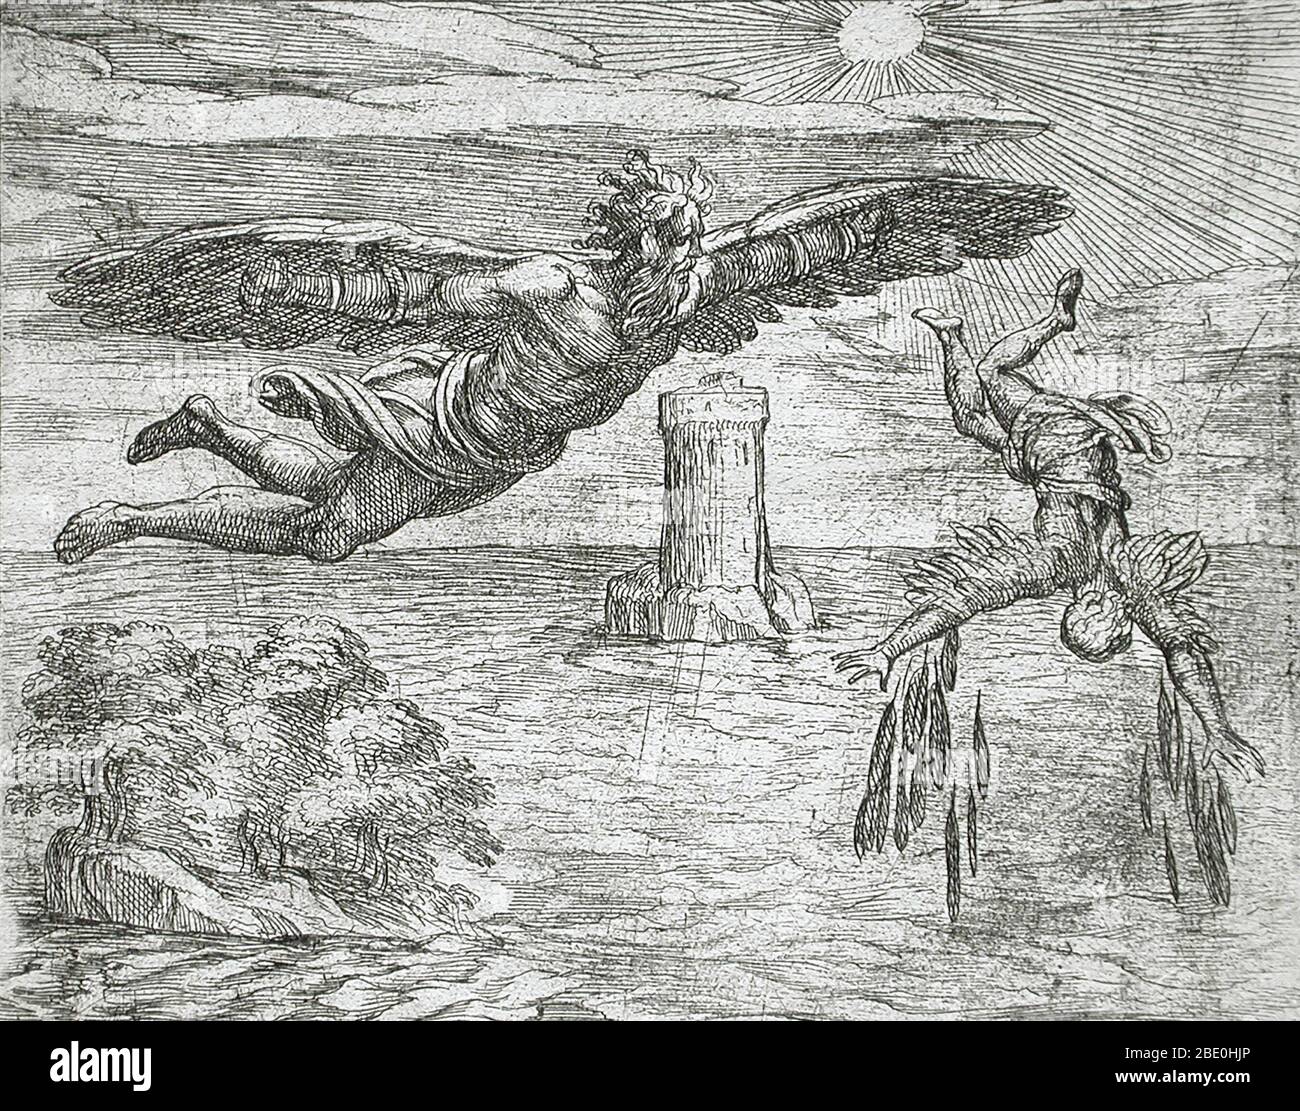 The Fall of Icarus, alternate title: Daedalus Icaro alta nimis ambienti orbatur. Etching appeared in: The Metamorphoses of Ovid, plate 75, second edition illustrated by Antonio Tempesta, published 1606. Icarus was the son of Daedalus who dared to fly too near the sun on wings of feathers and wax. Daedalus had been imprisoned by King Minos of Crete within the walls of his own invention, the Labyrinth. But the great craftsman's genius would not suffer captivity. He made two pairs of wings by adhering feathers to a wooden frame with wax. Giving one pair to his son, he cautioned him that flying to Stock Photo